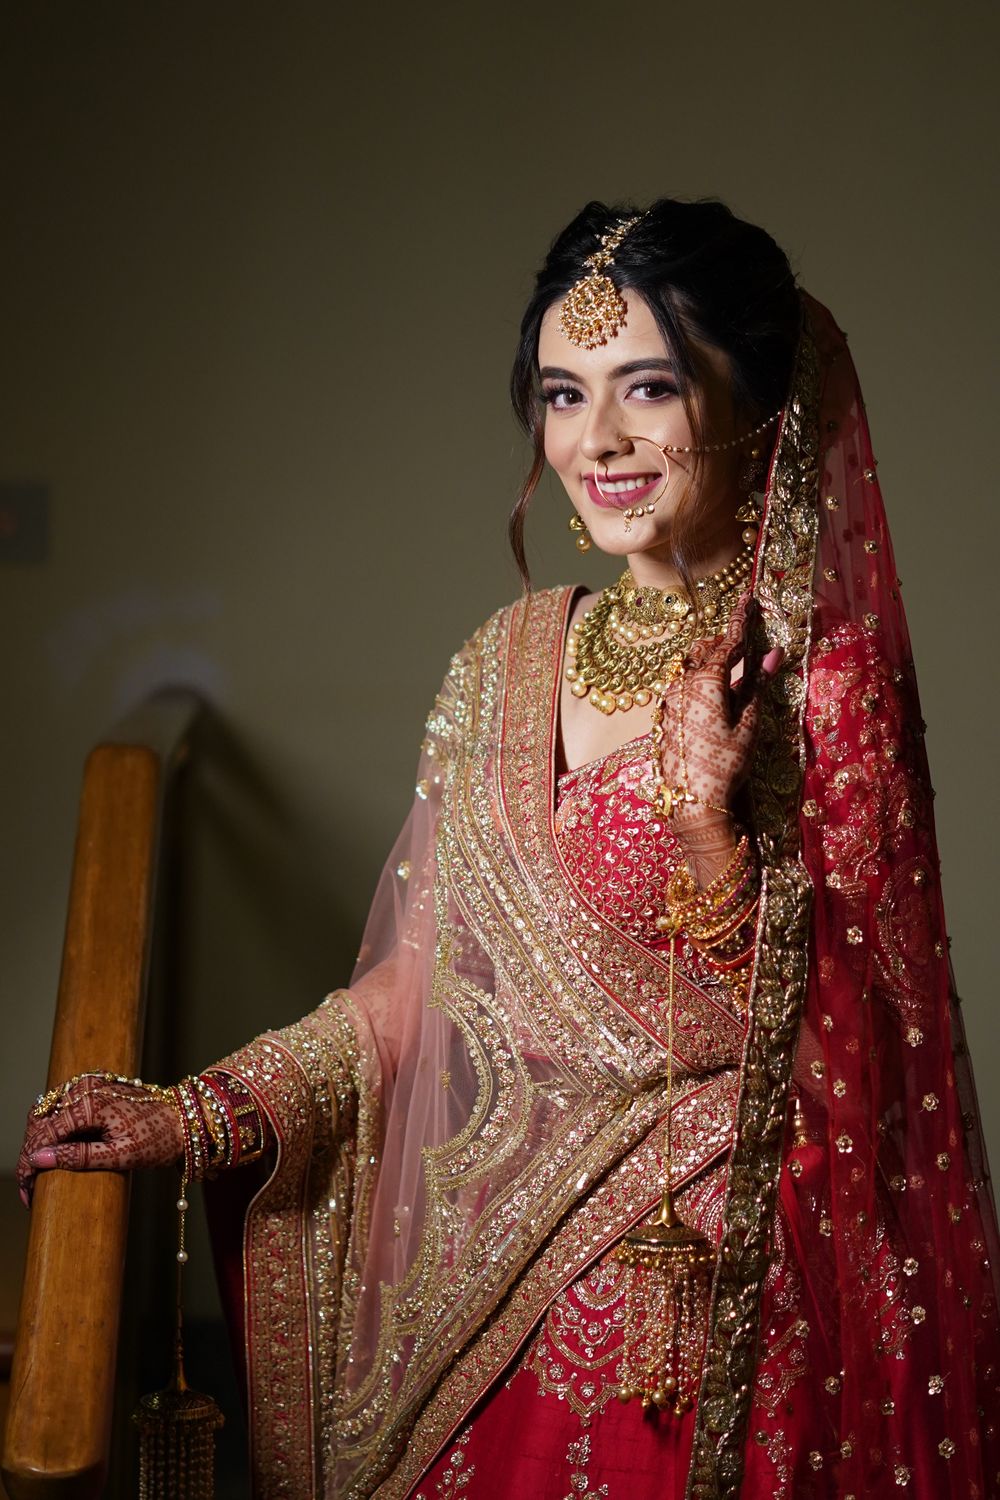 Photo of Bride wearing a red lehenga on the wedding day.